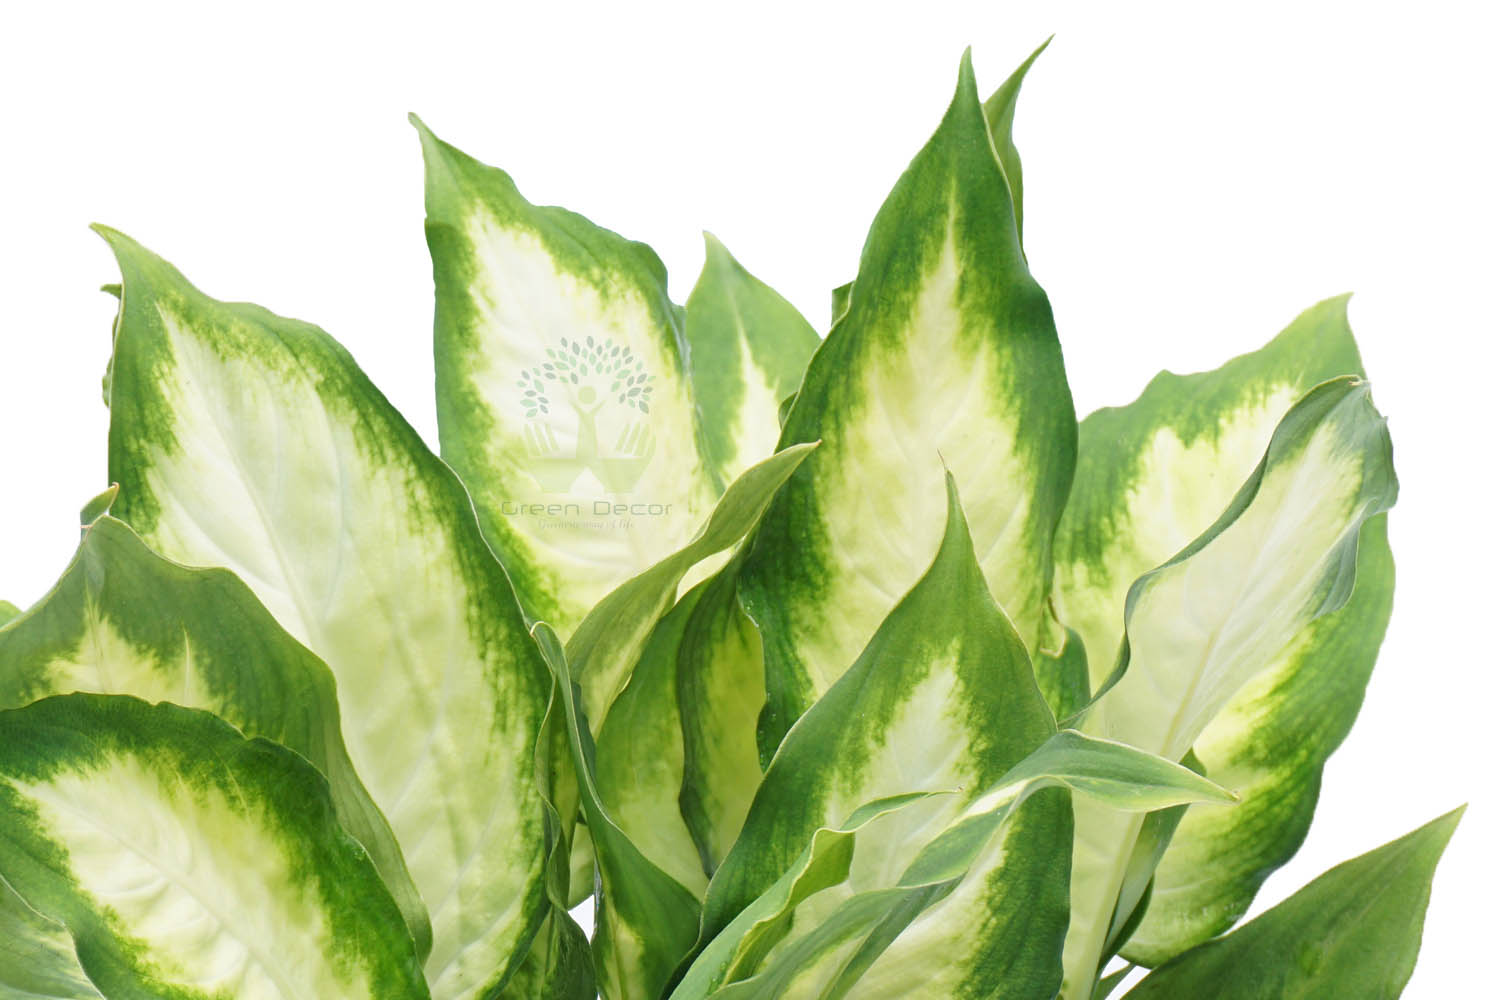 Buy Dieffenbachia Plants , White Pots and seeds in Delhi NCR by the best online nursery shop Greendecor.